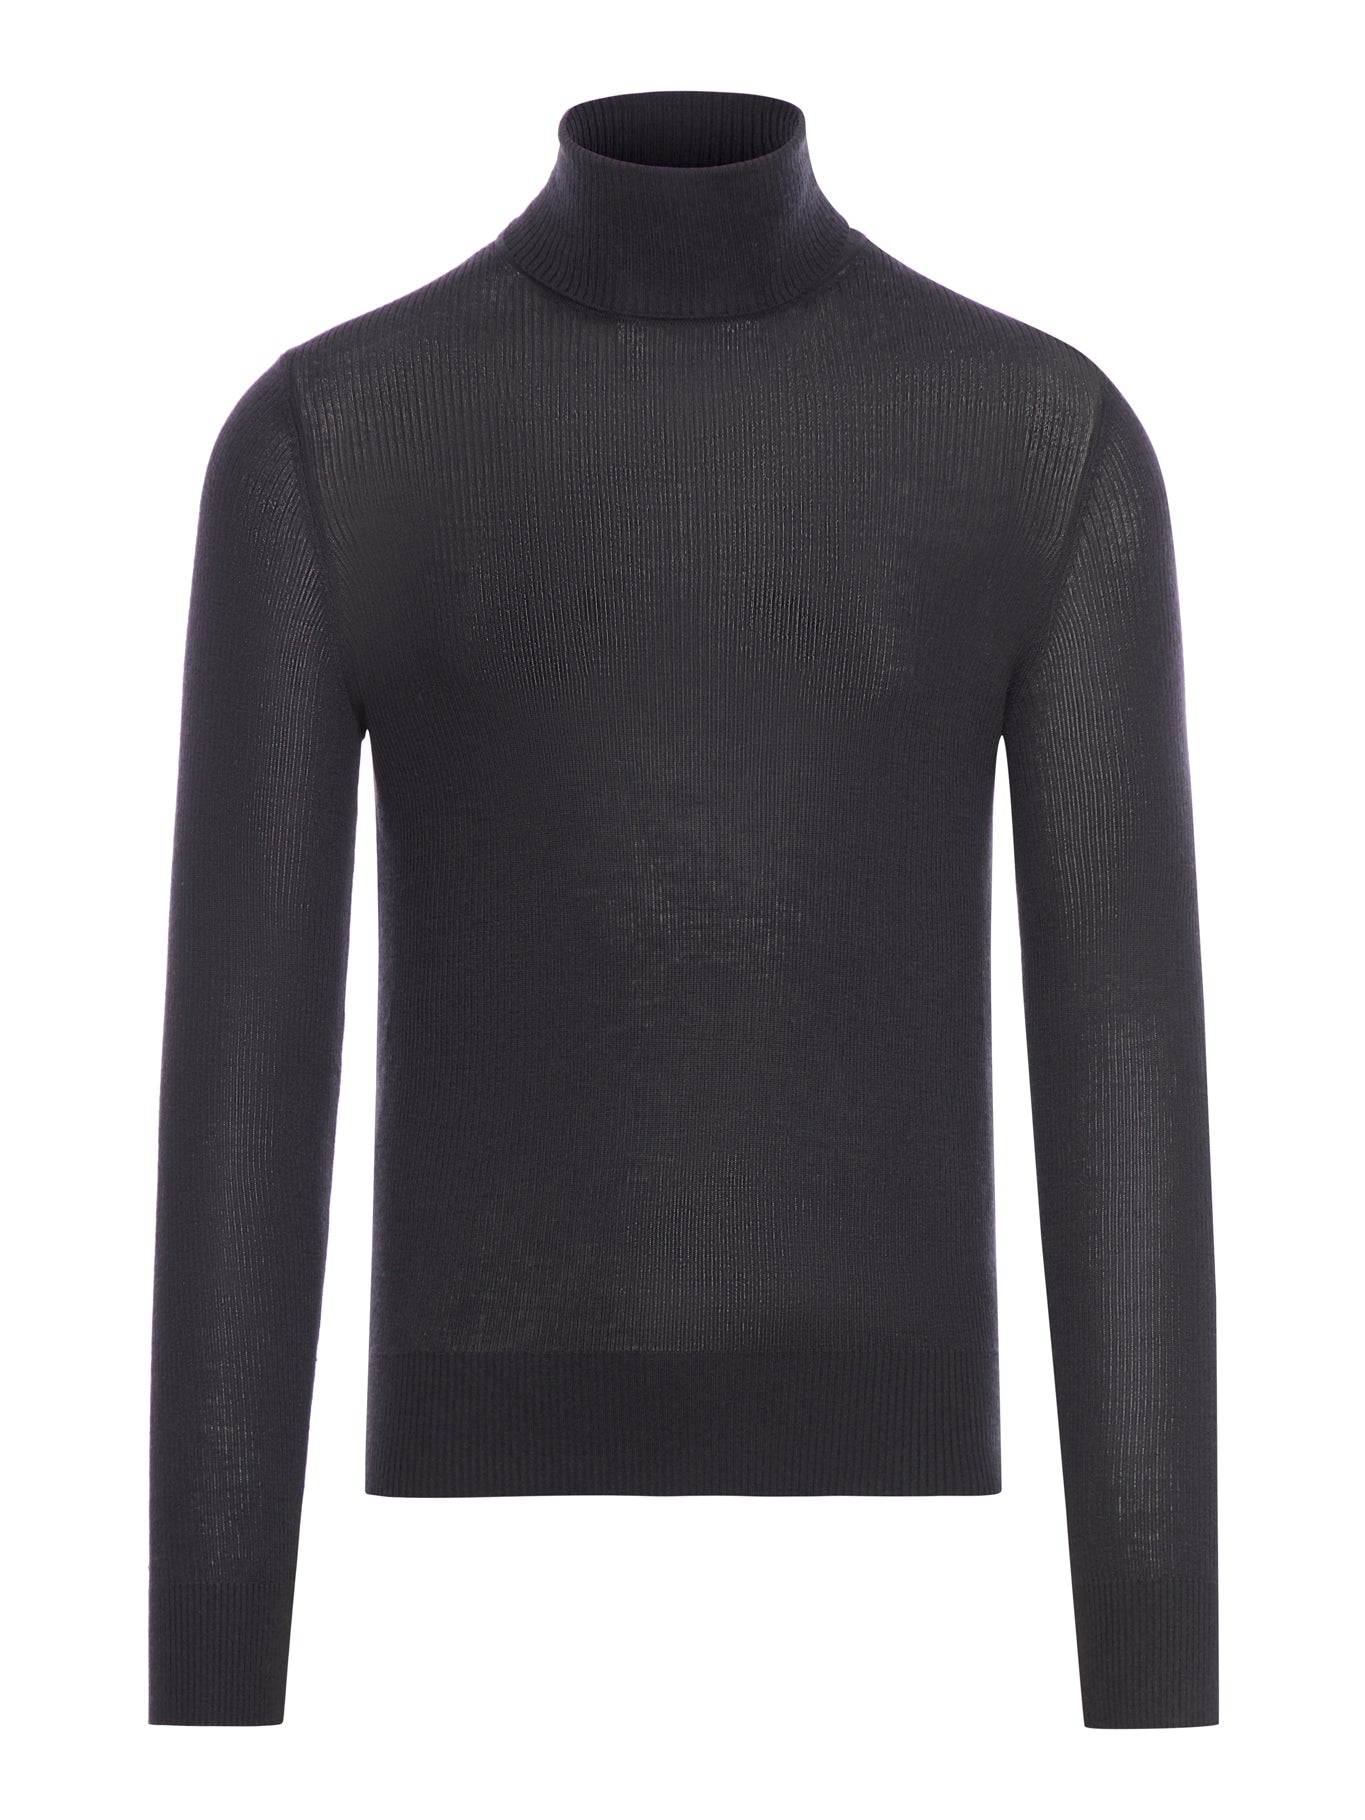 TOM FORD RIBBED SWEATER